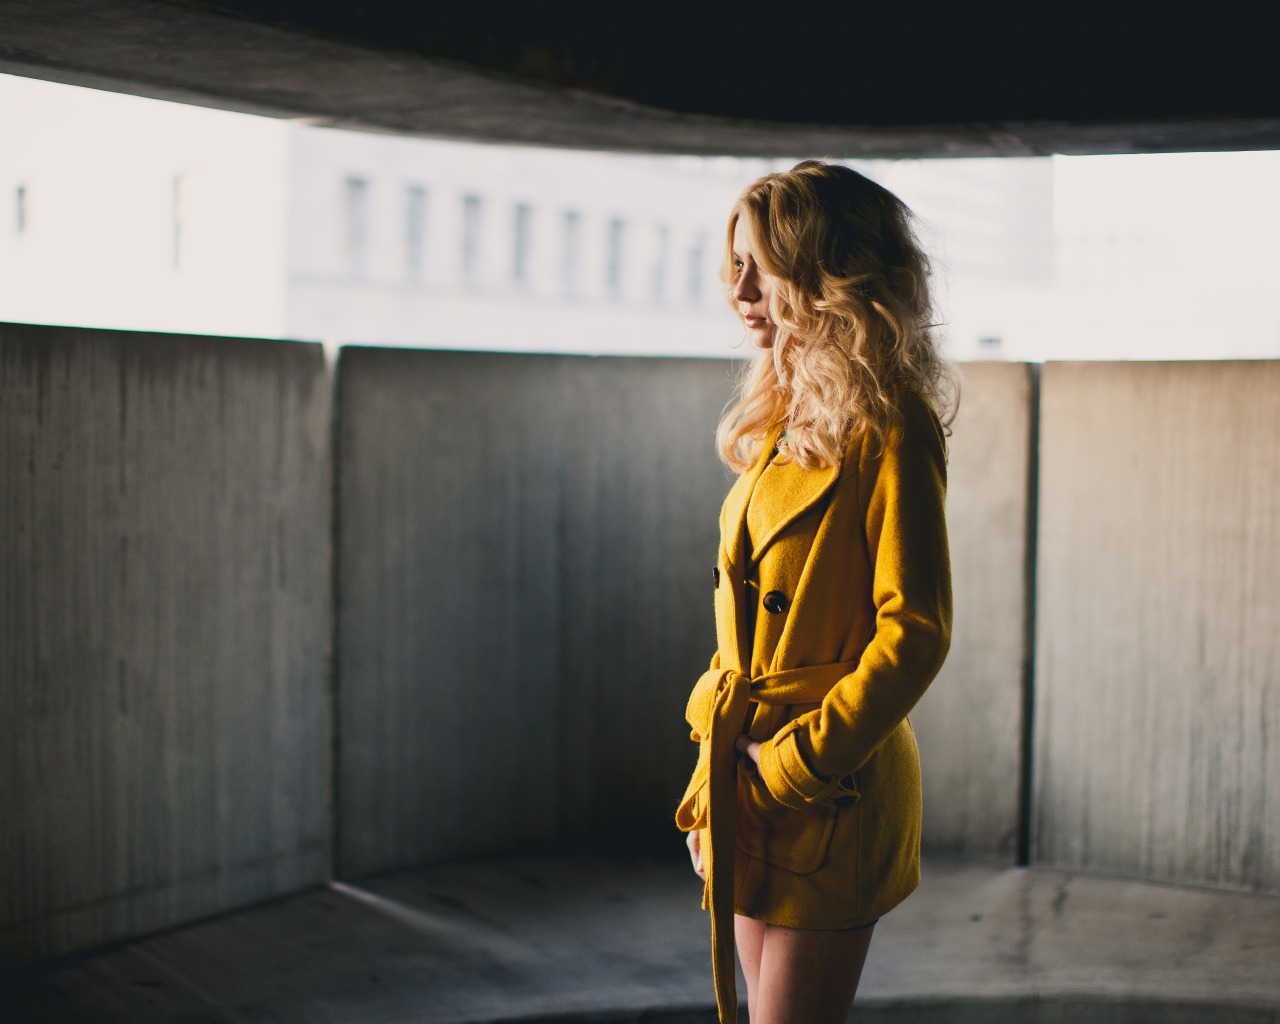 Women Long Hair Coats Yellow Coats Blonde Looking Into The Distance Hands In Pockets Standing 1280x1024